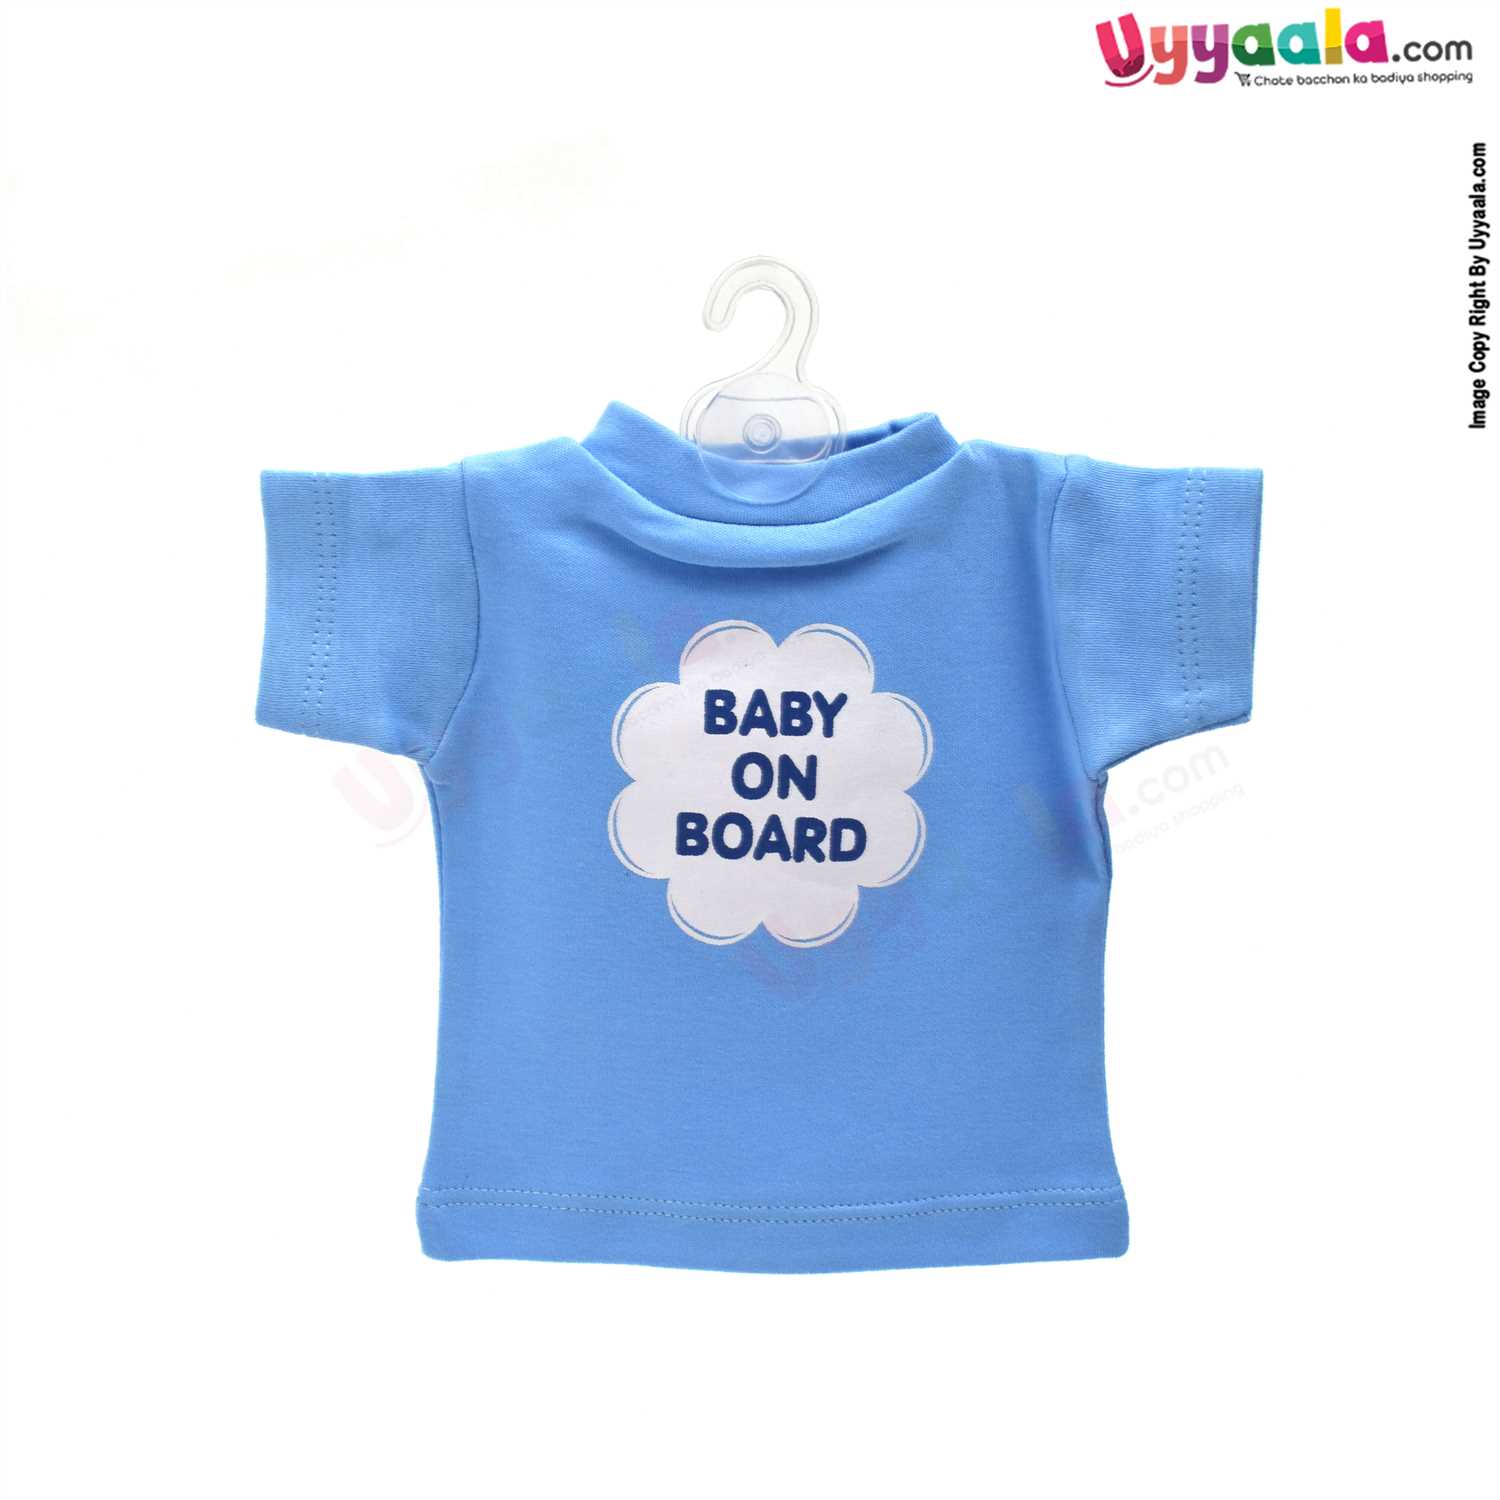 Baby on Board sign T-Shirt for Car , Size (19*16cm)